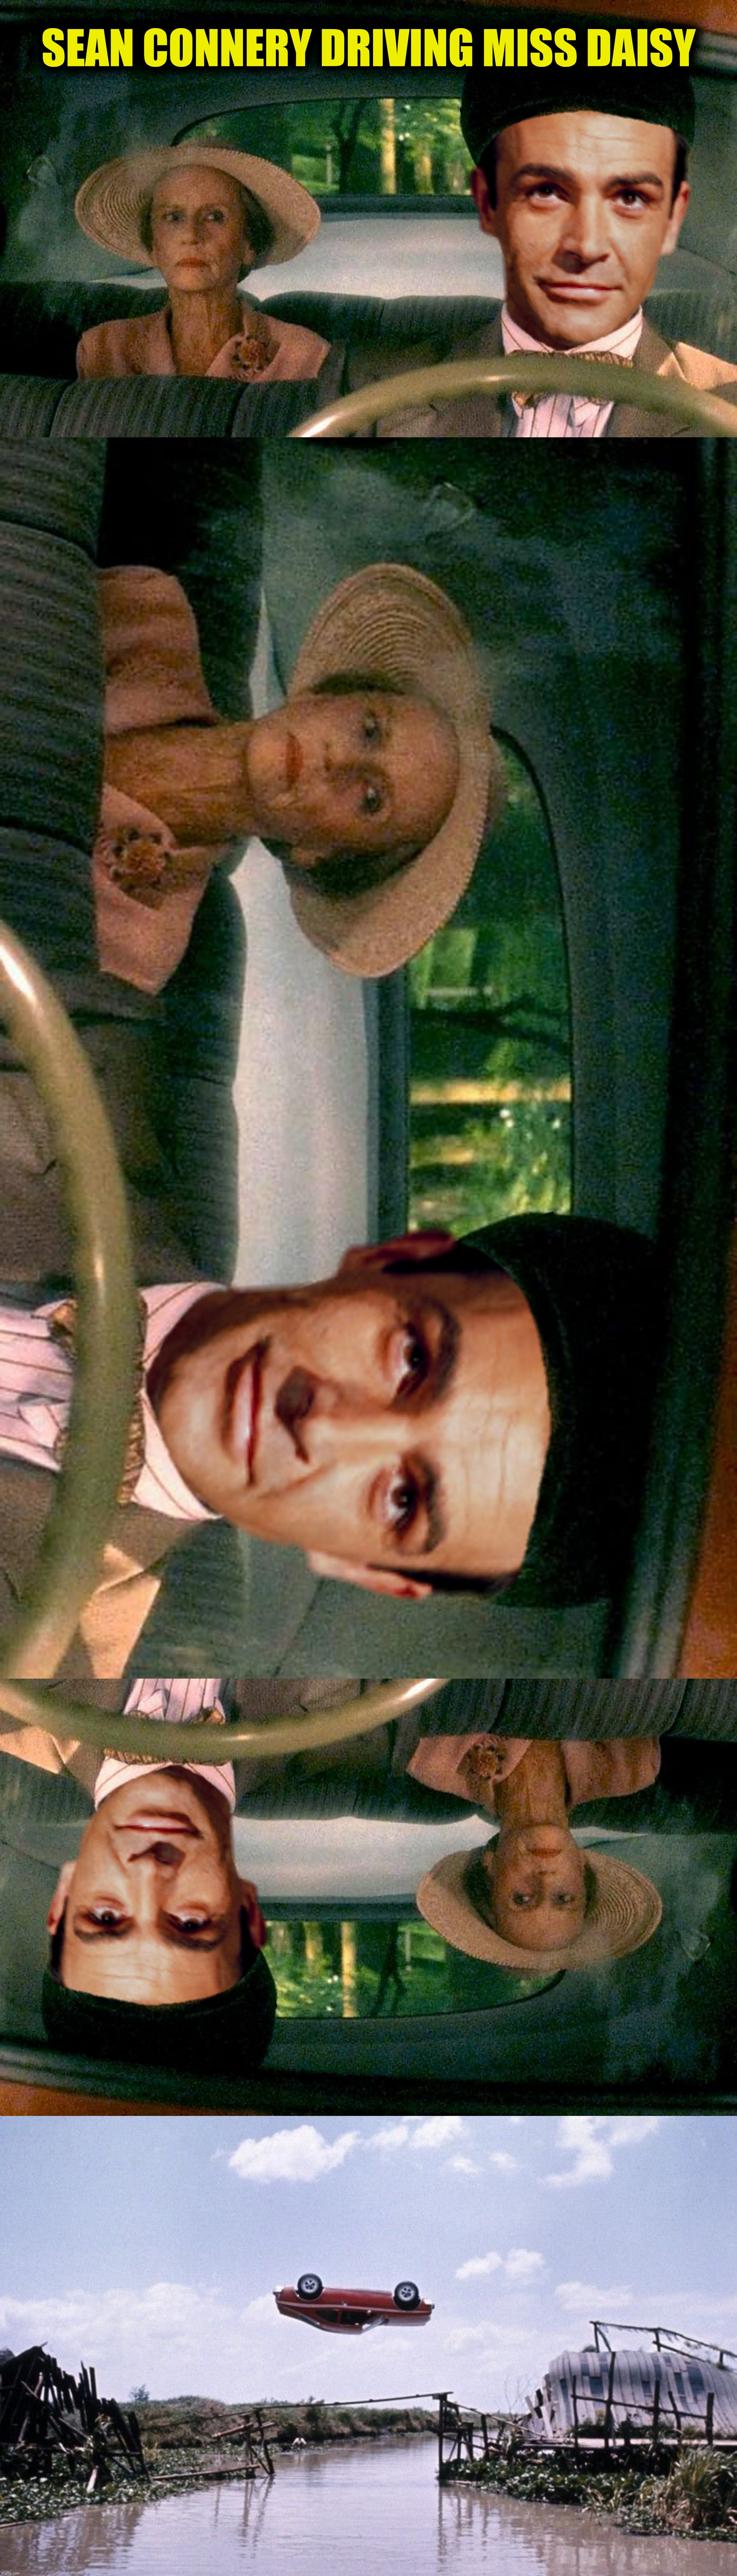 Bad Photoshop Sunday presents:  R.I.P. Sean Connery (and yes I know that the last panel is from "The Man With The Golden Gun") | SEAN CONNERY DRIVING MISS DAISY | image tagged in bad photoshop sunday,sean connery,driviing miss daisy,rip sean connery | made w/ Imgflip meme maker